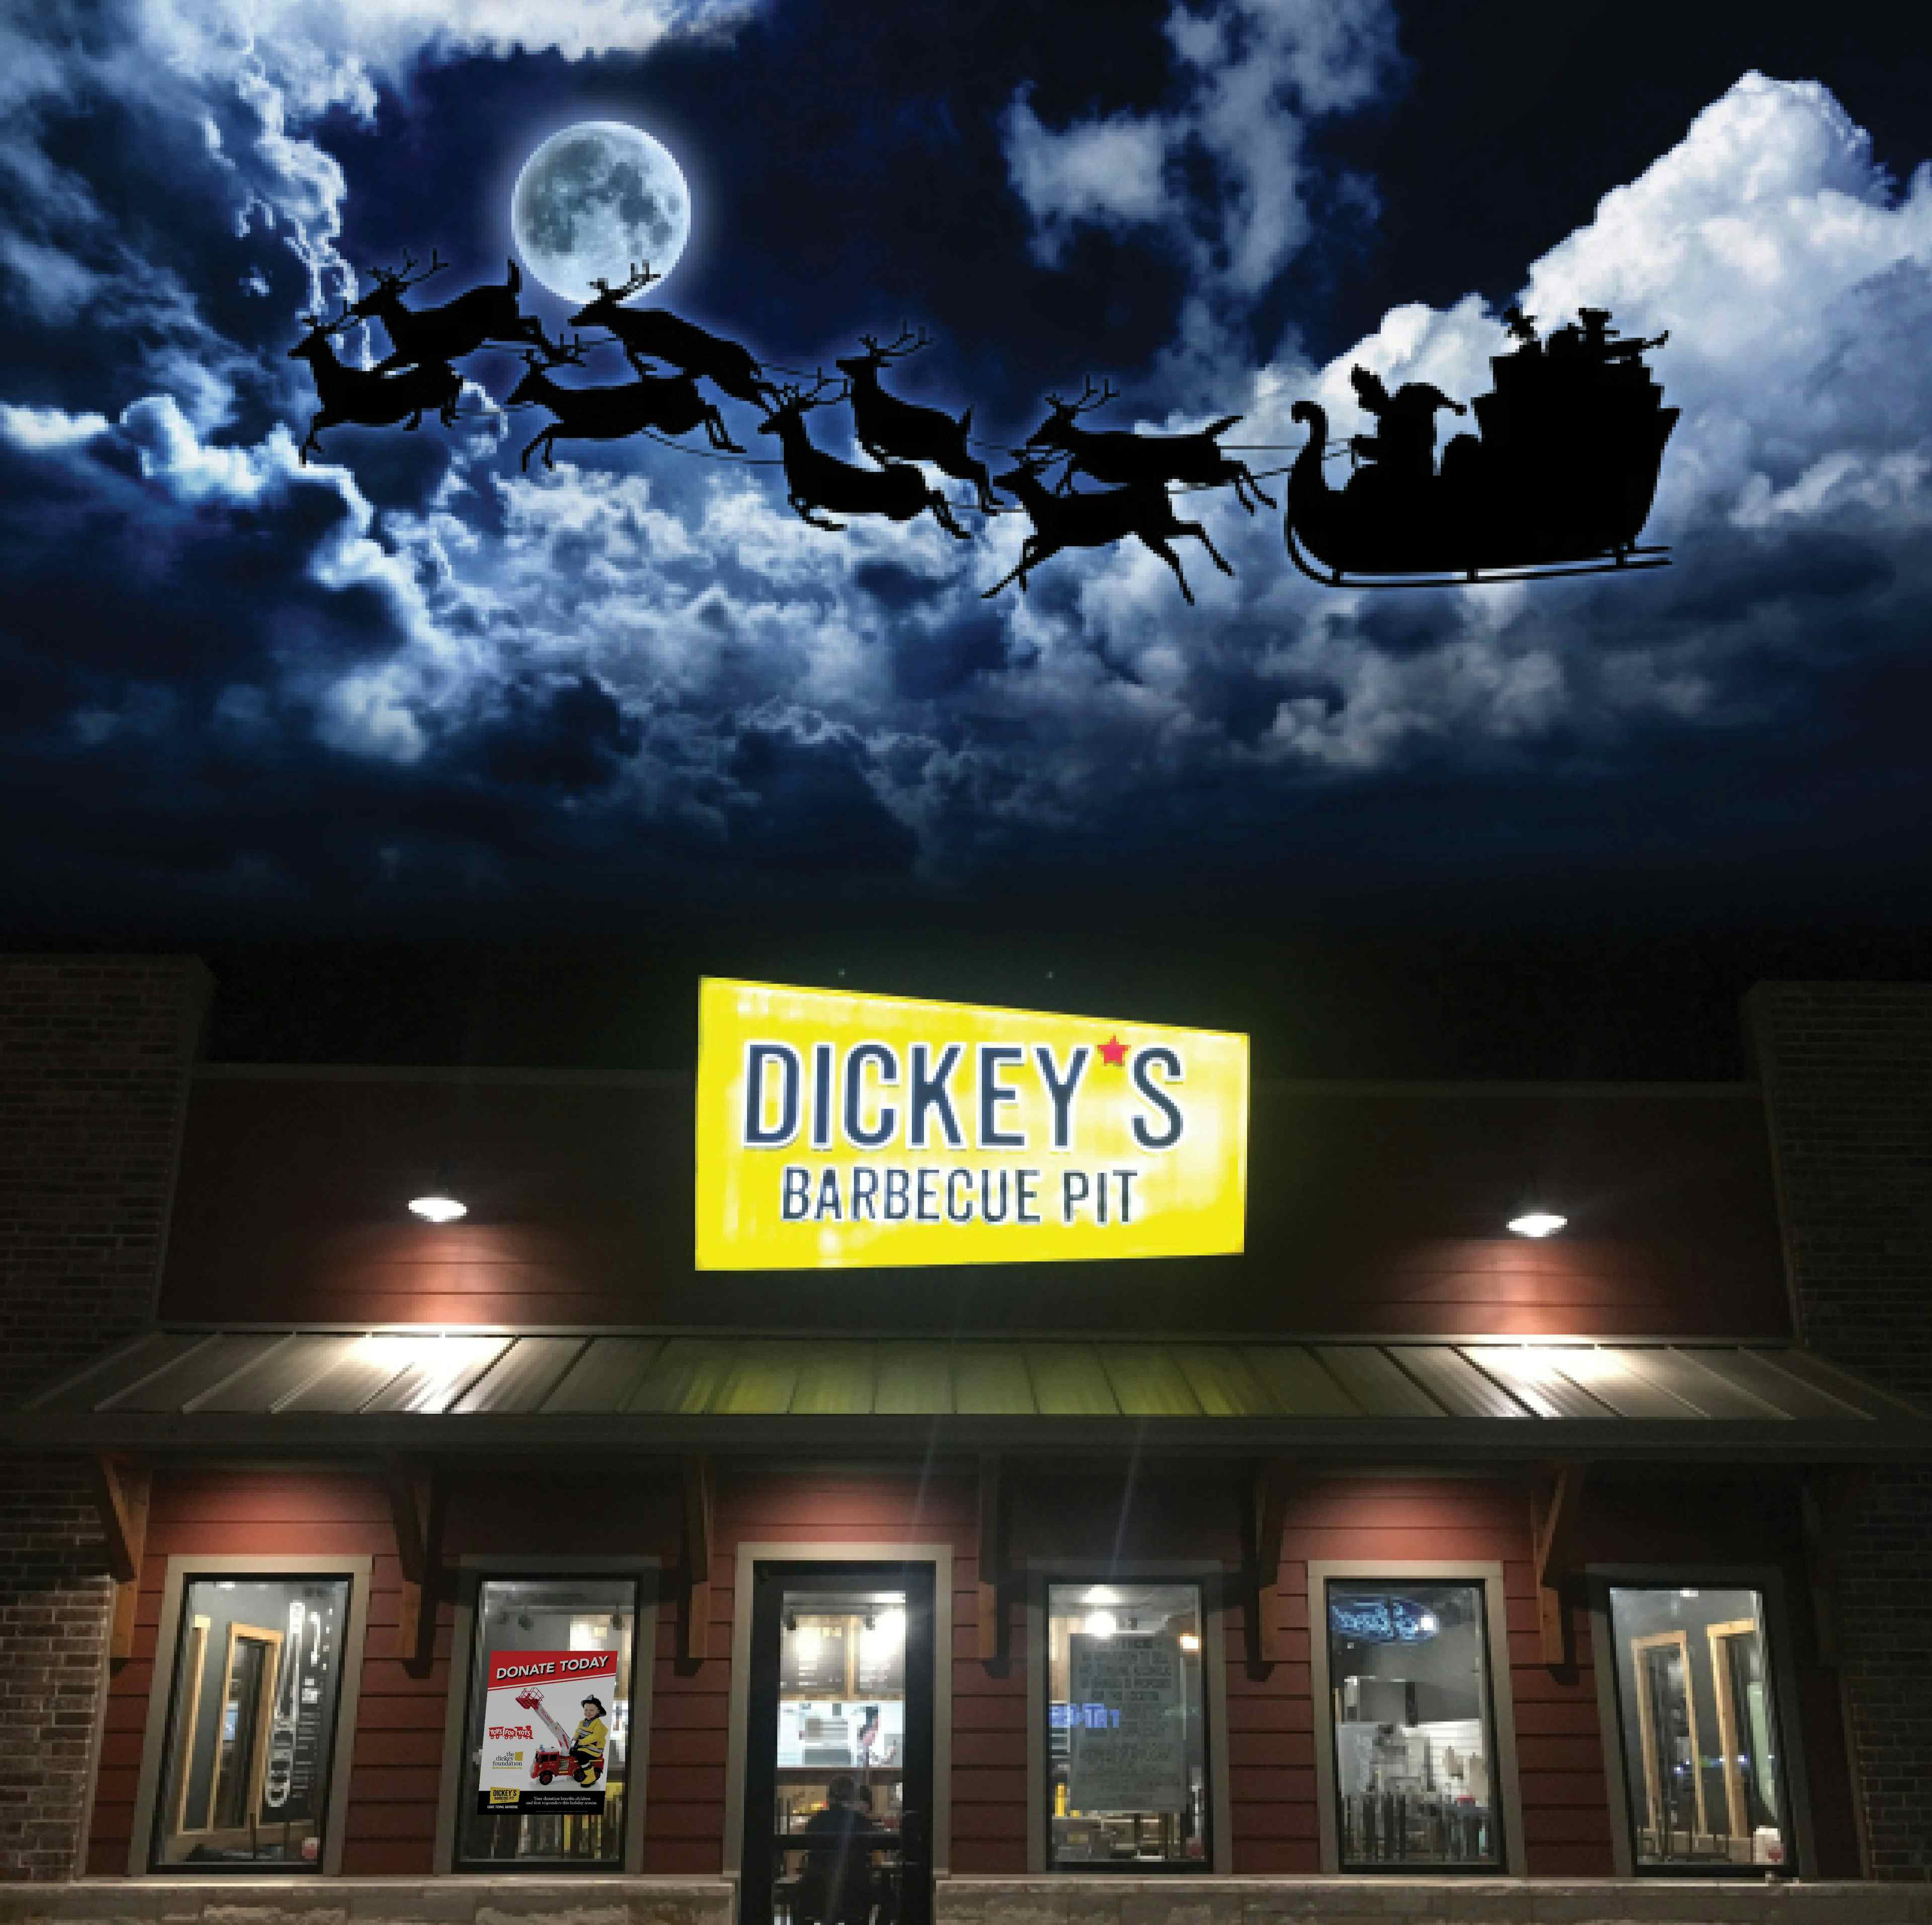 Dickey’s Barbecue Pit Helps Bring The Magic of Christmas to More Children This Year